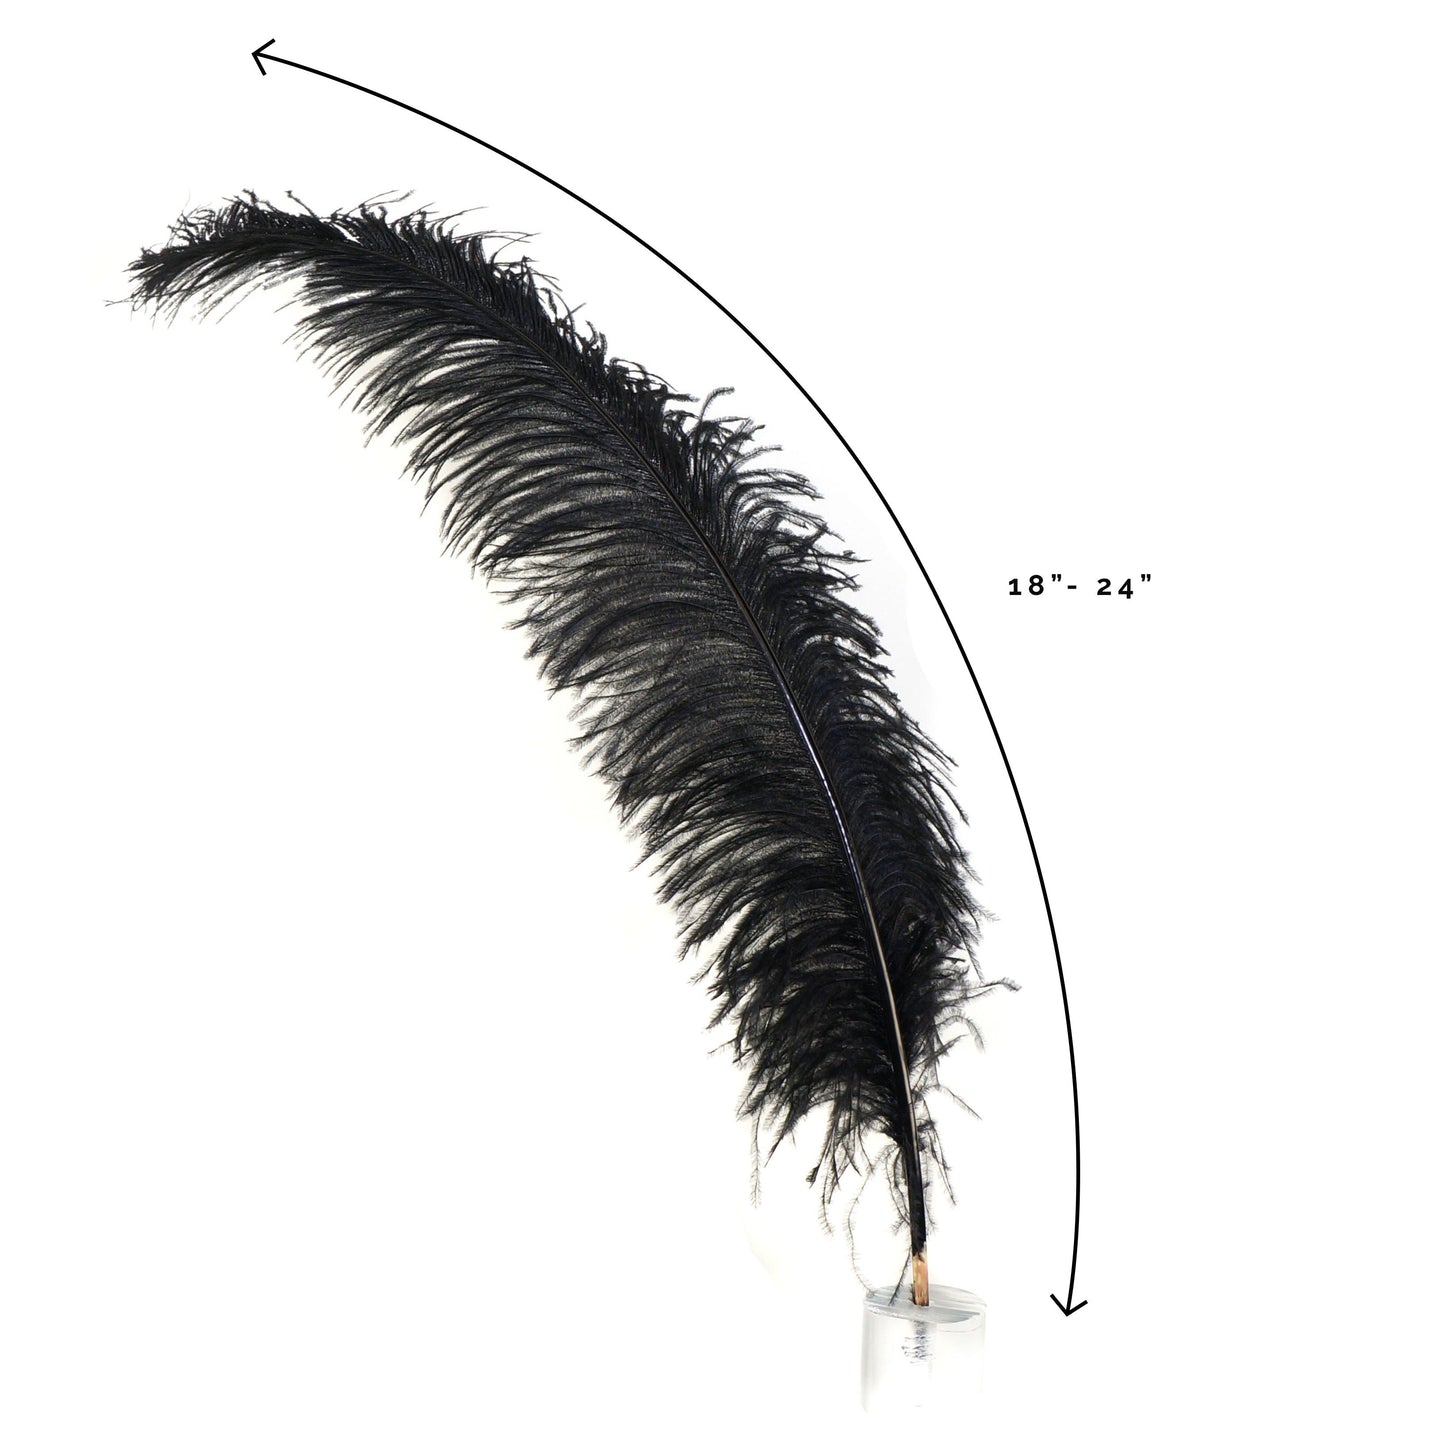 Larryhot Black Ostrich Feathers Bulk - 16-18 inch 10pcs Feathers for  Vase,Wedding Party Centerpieces and Home Decorations (Black)